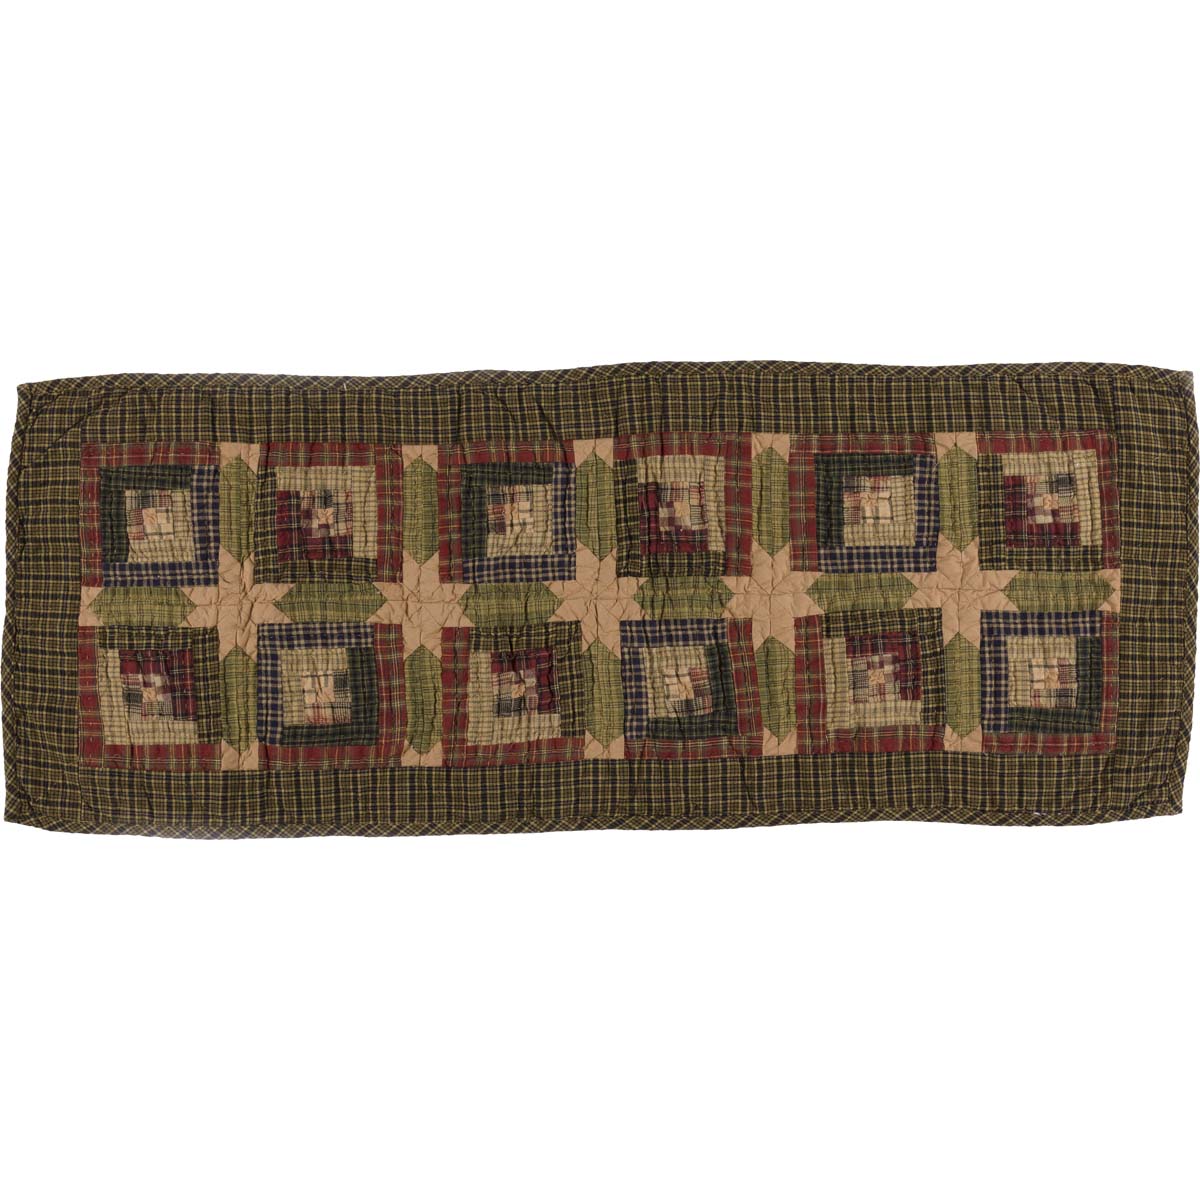 Tea Cabin Quilted Table Runner 13" x 36"